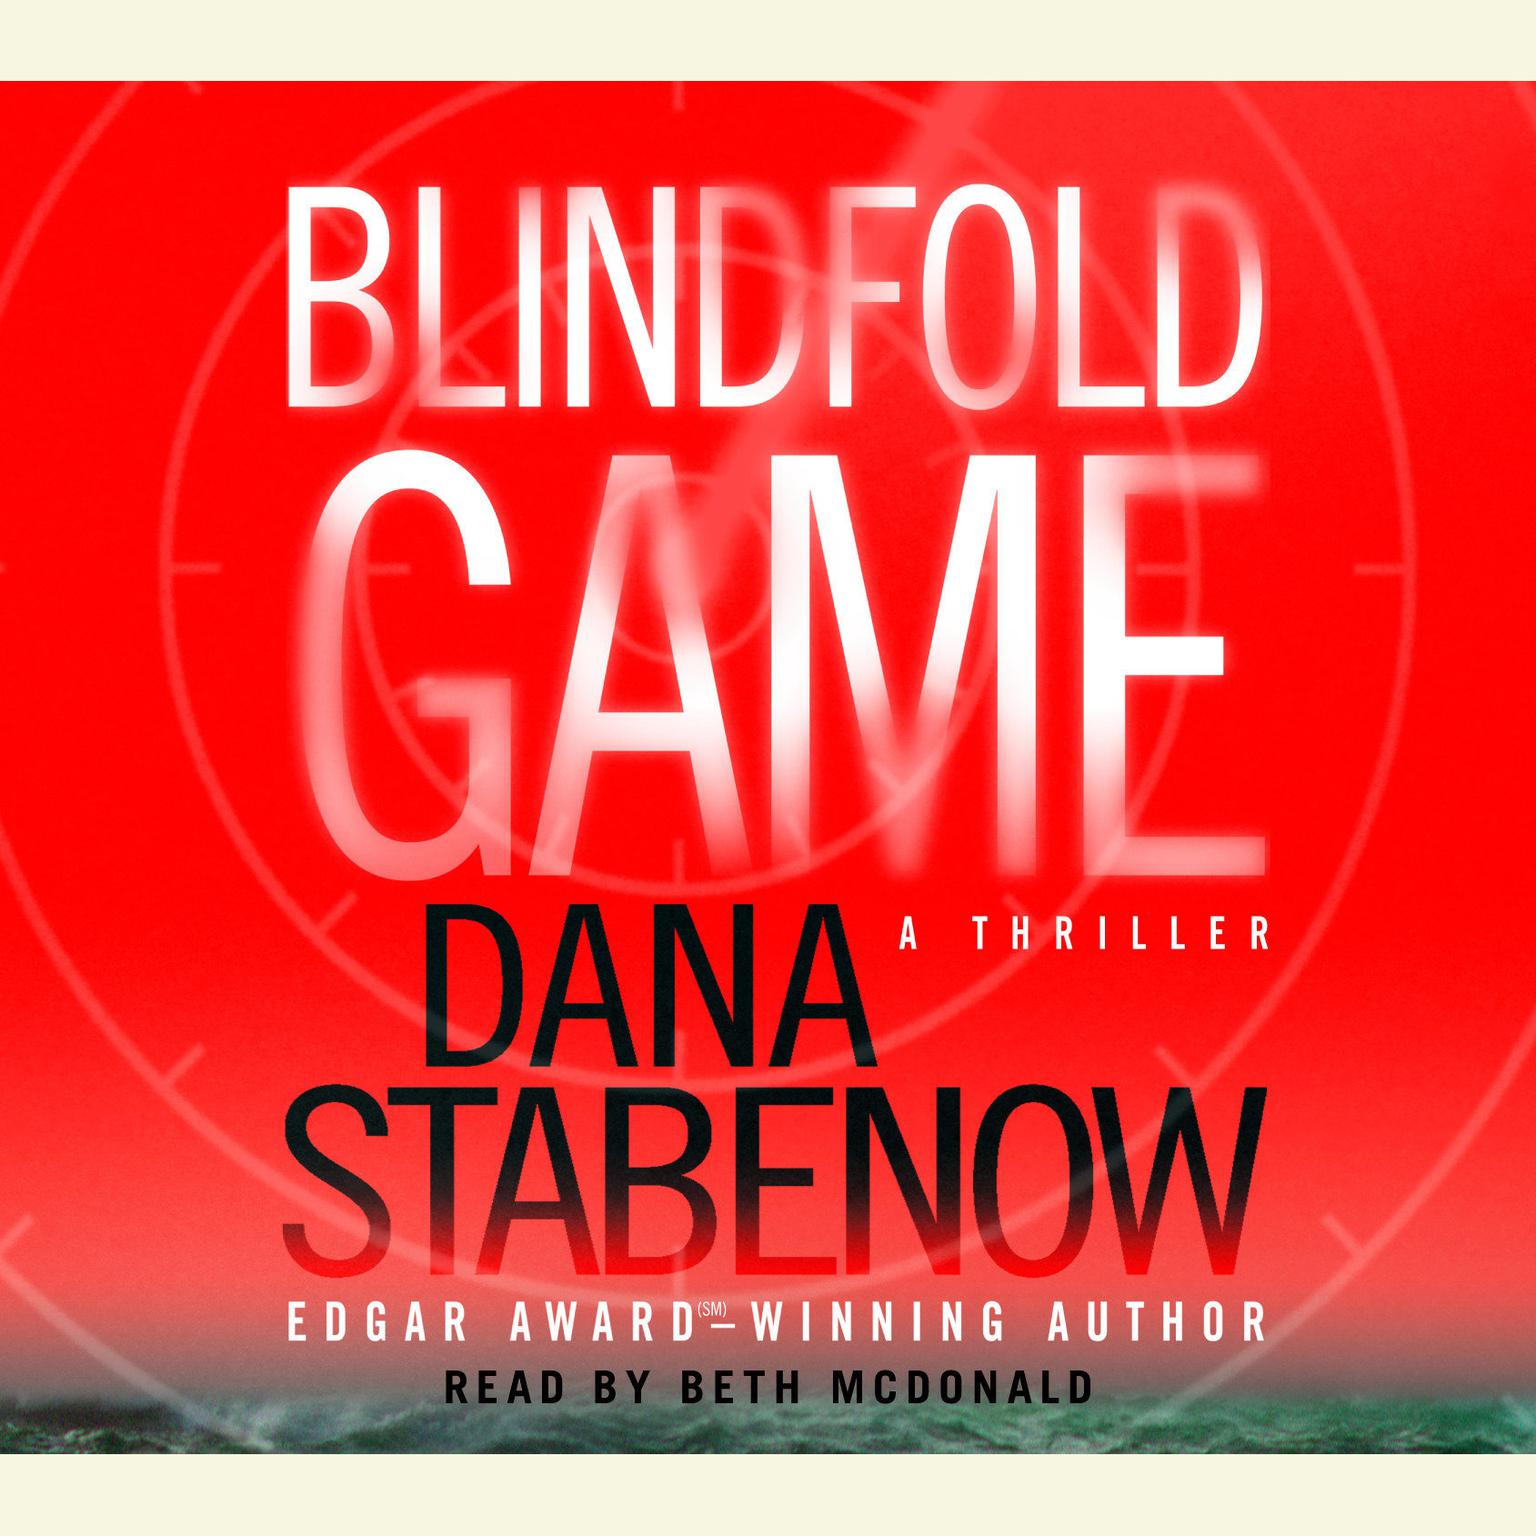 Blindfold Game (Abridged) Audiobook, by Dana Stabenow